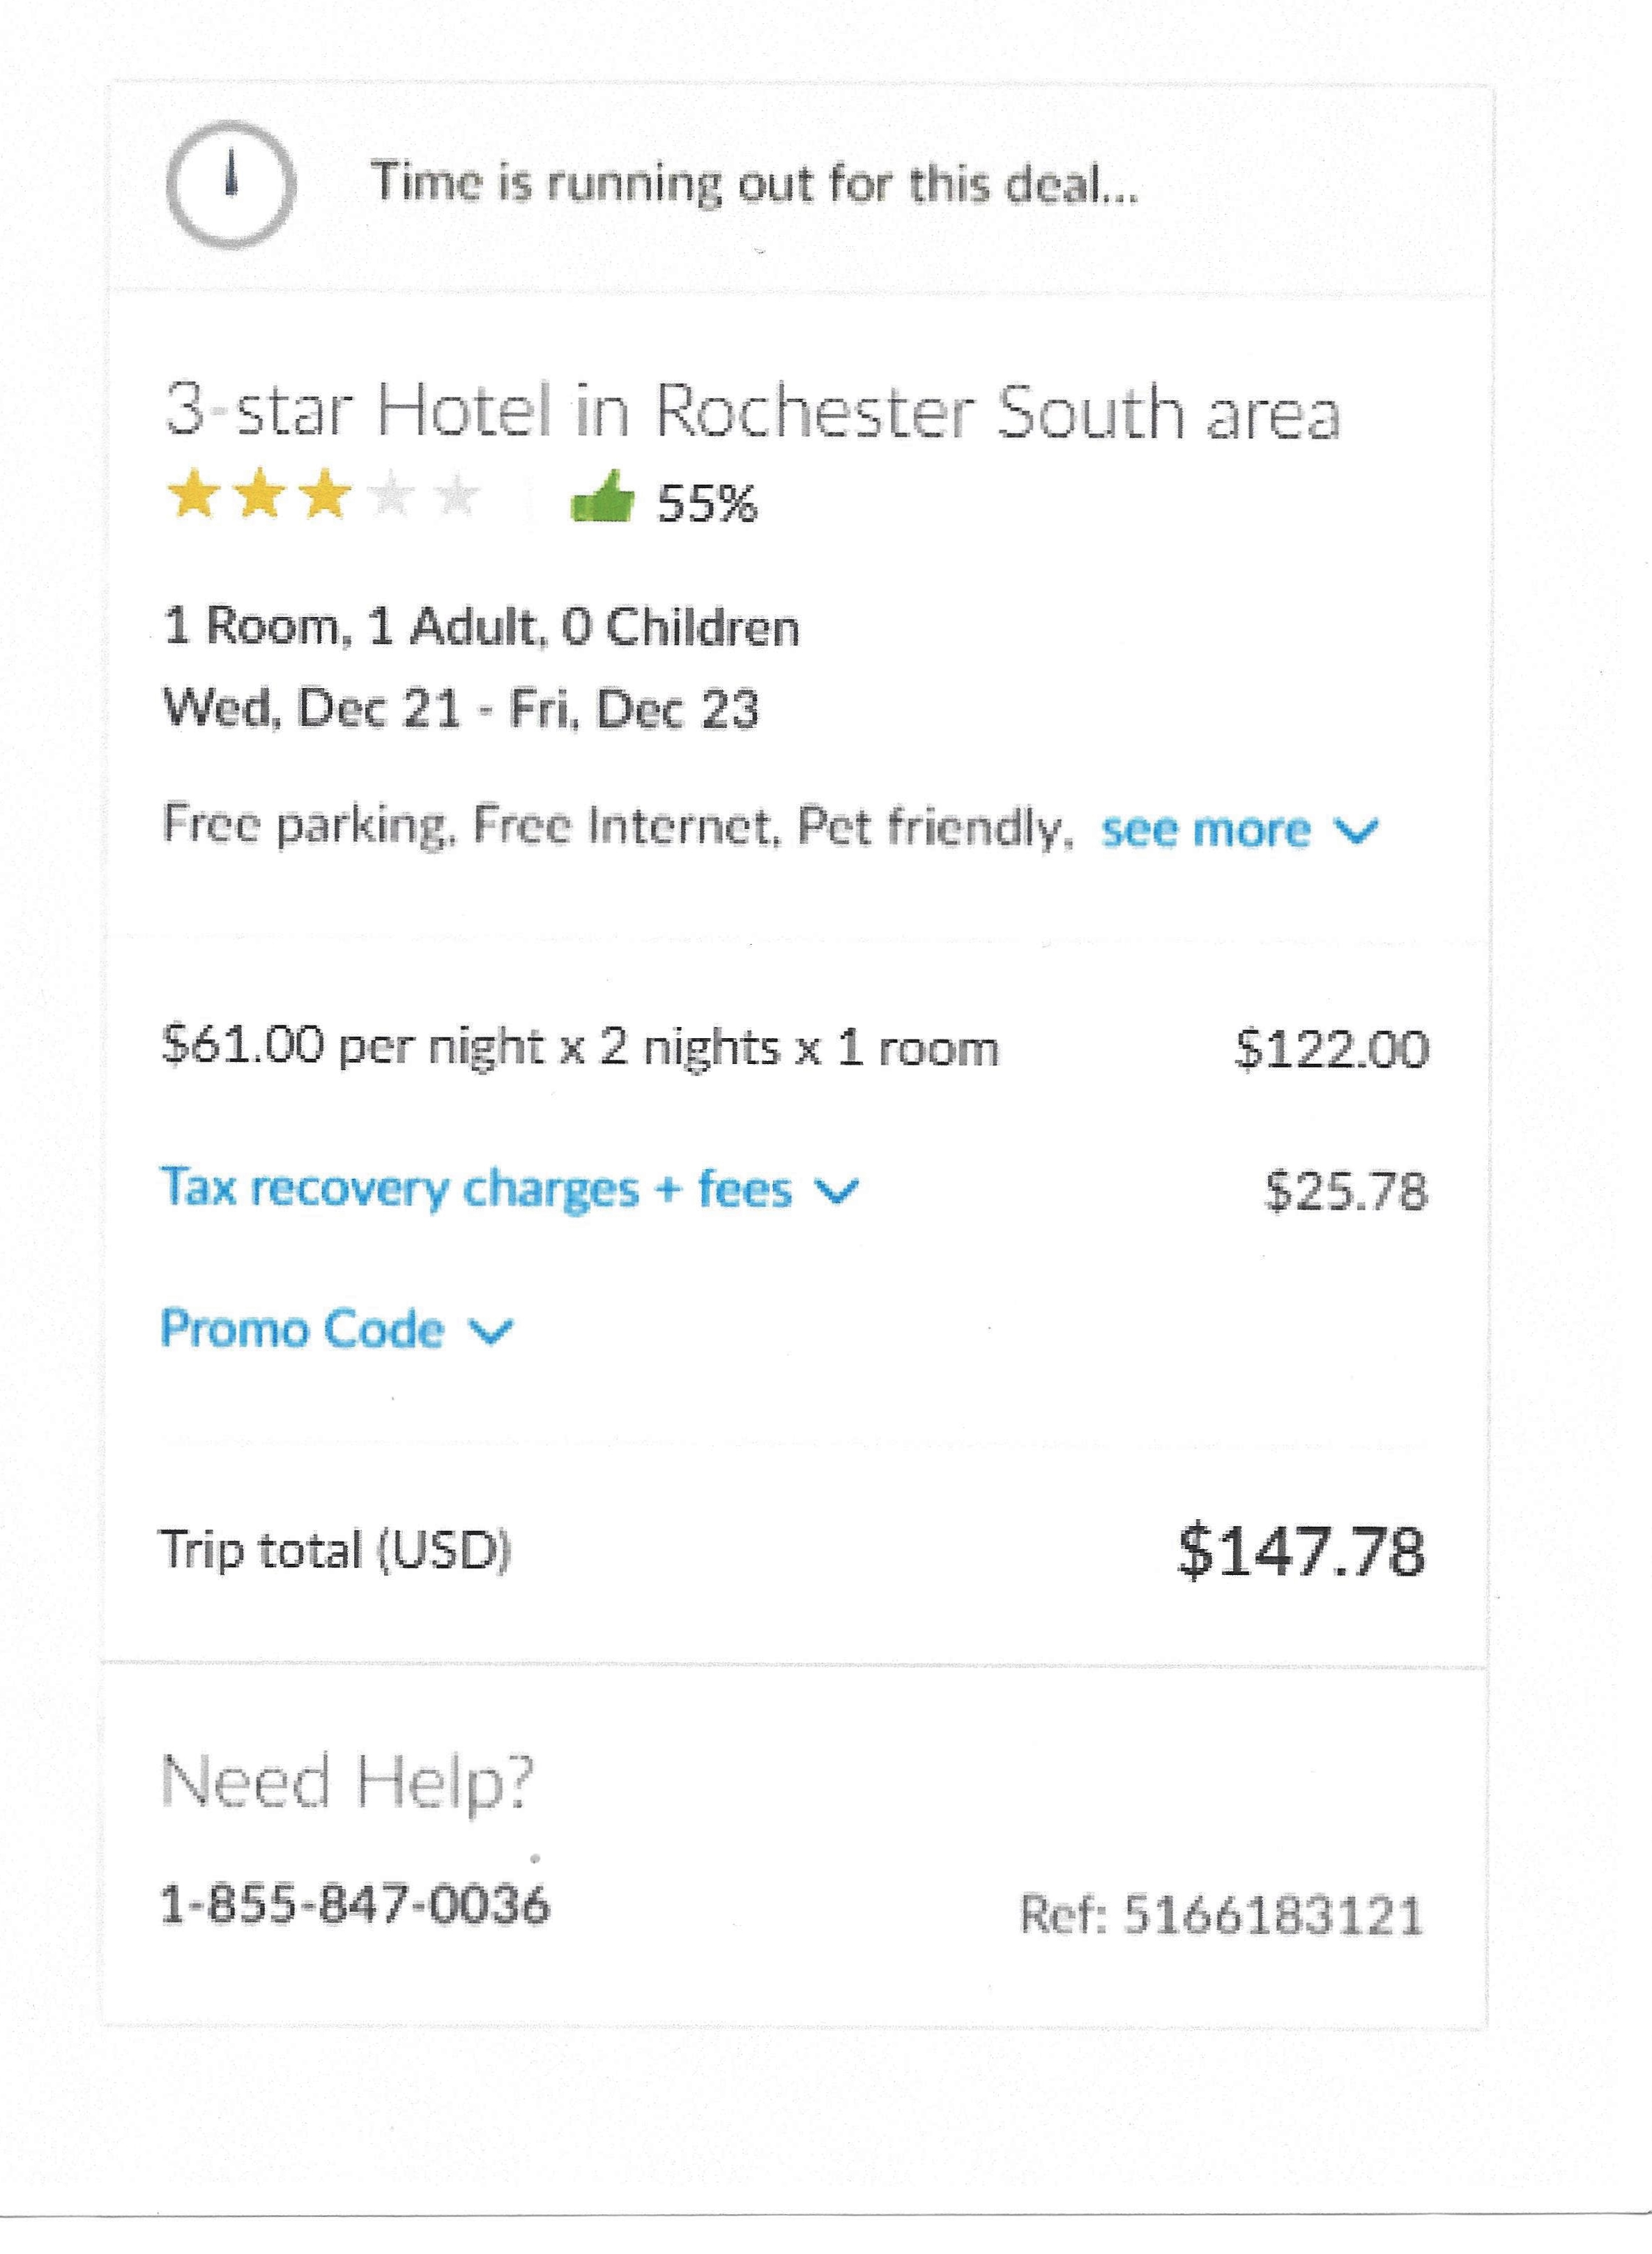 Hotwire rate as booked